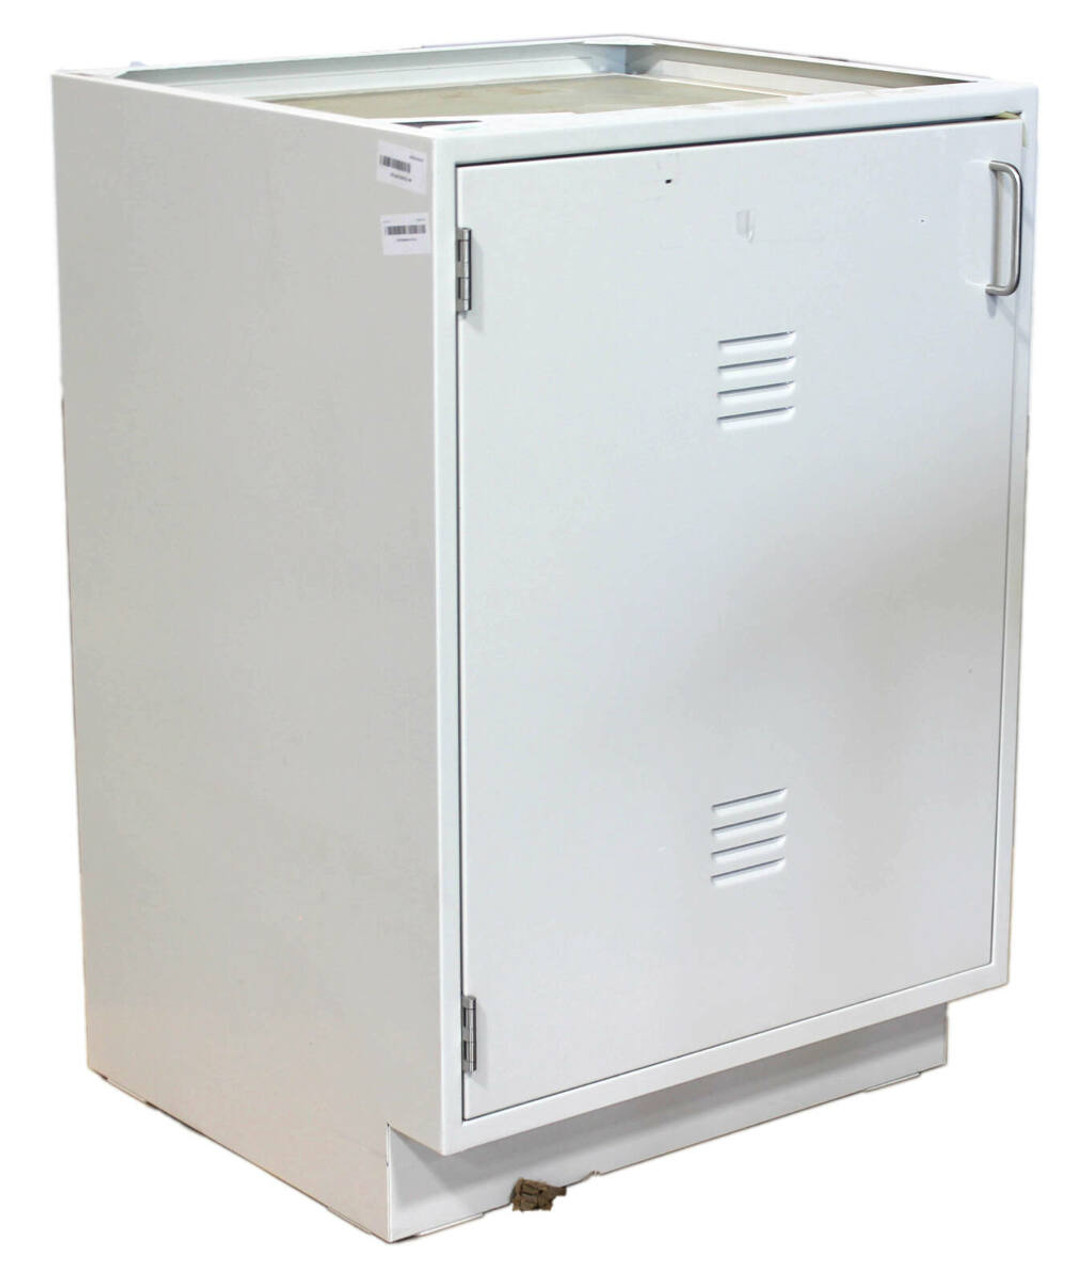 ICI Quick Ship CPJTP185-24GG Standing Height Acid Storage Cabinet Left Hinged, 1 Door, 24 Inches Wide x 35-1/4 Inches Tall x 21-5/8 Inches Deep, Polyethylene Liner, ICI Number: 950S8210.